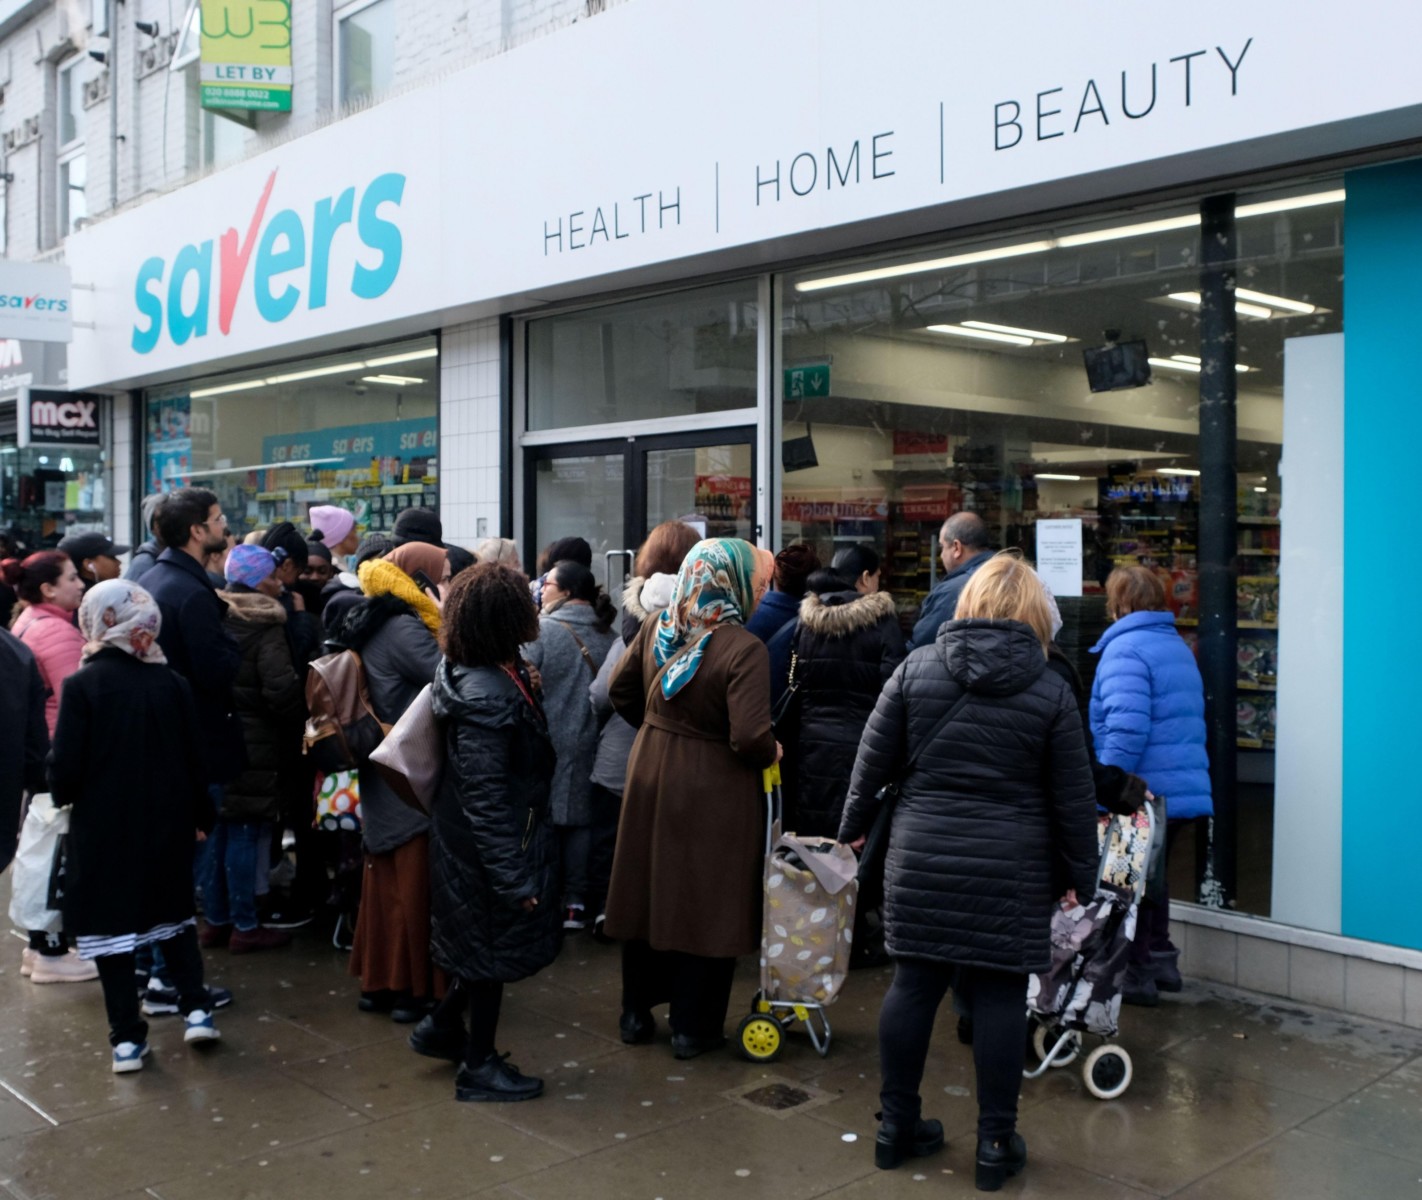 Wood Green, London, UK. 14th March 2020. Coronavirus: people queue to buy toilet paper at a Savers store in Wood Green, north London. Credit: Matthew Chattle/Alamy Live News